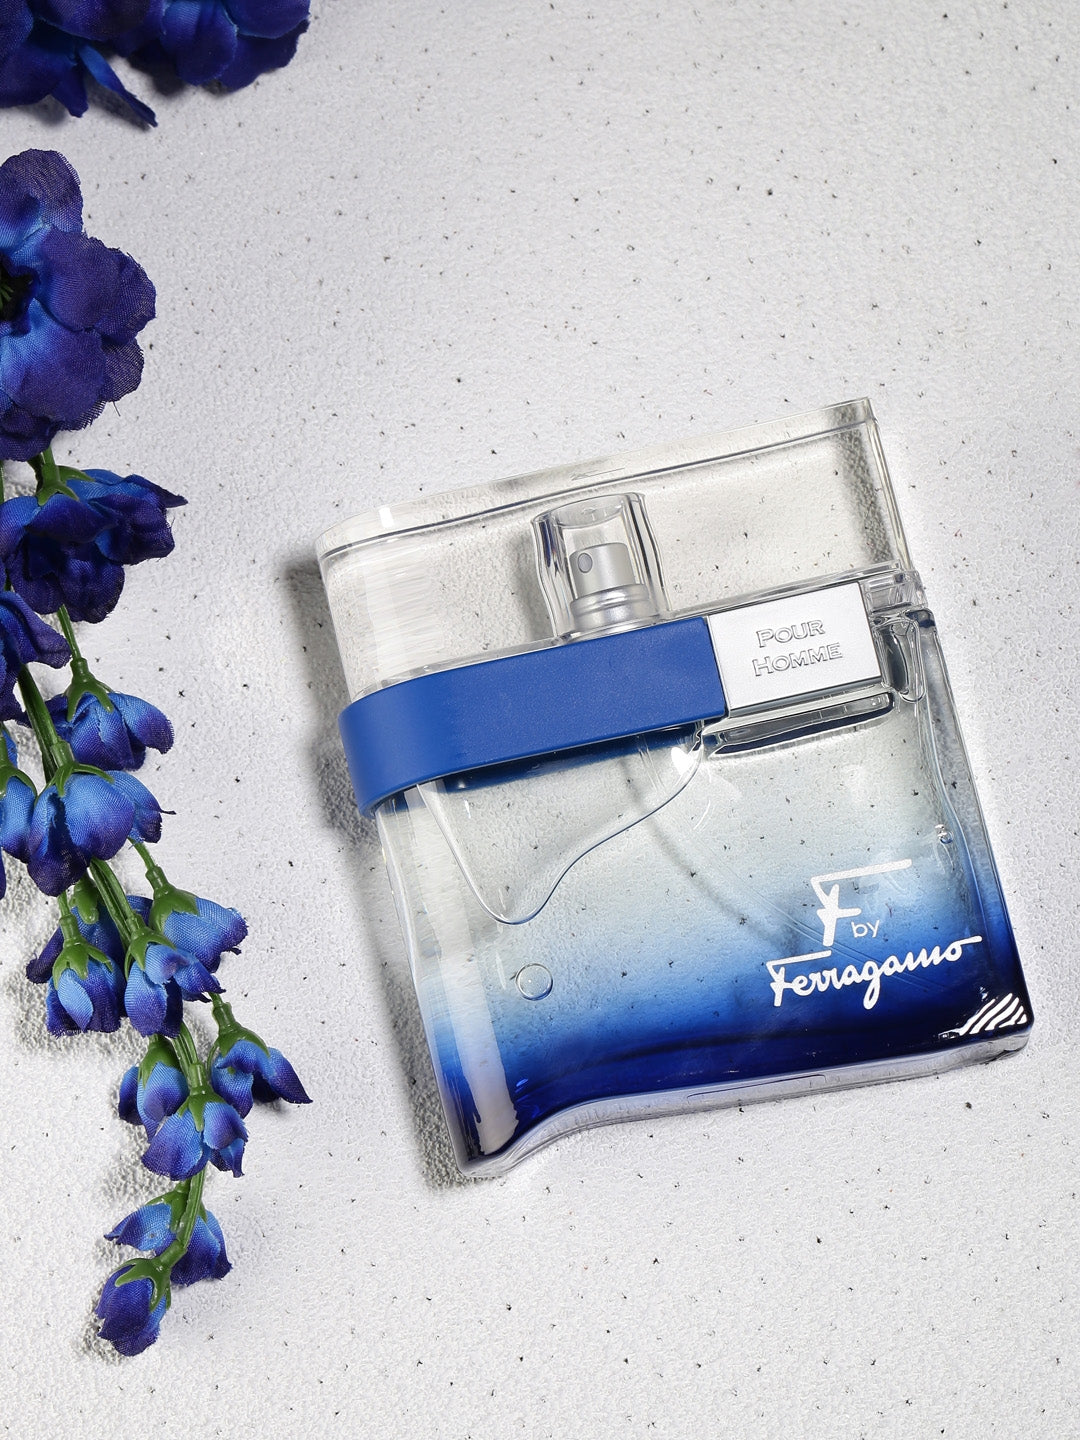 F by Ferragamo Pour Homme Free Time EDT - Perfume Planet 